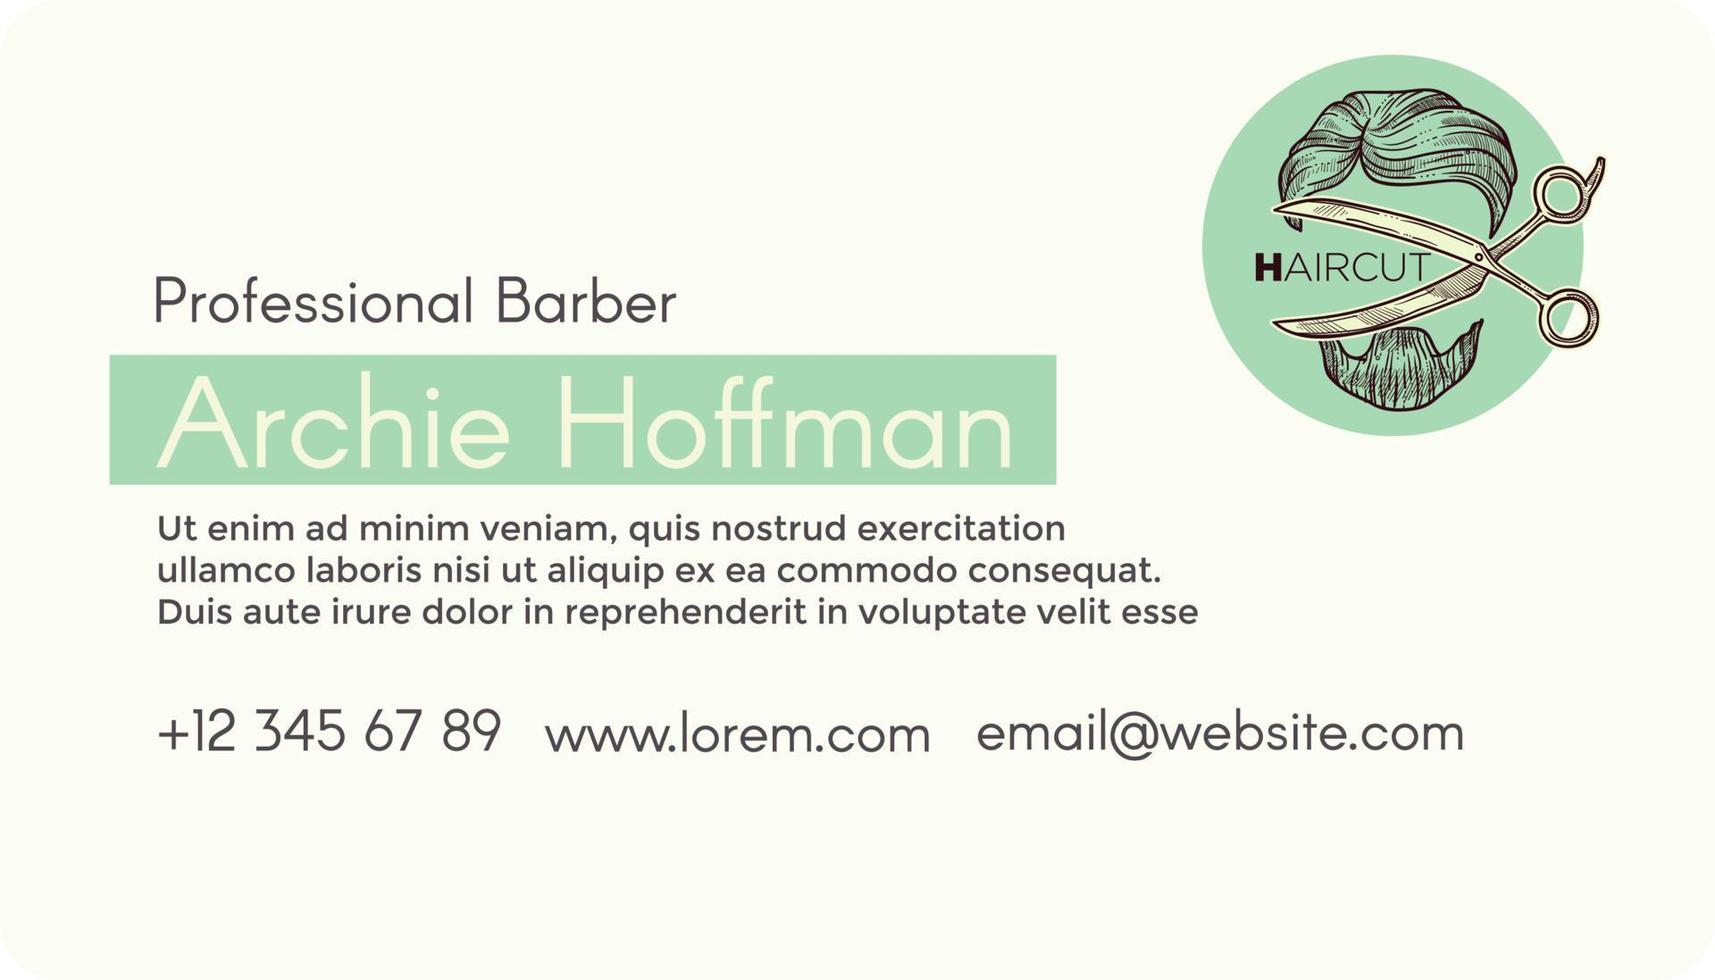 Professional barber service, business card vector